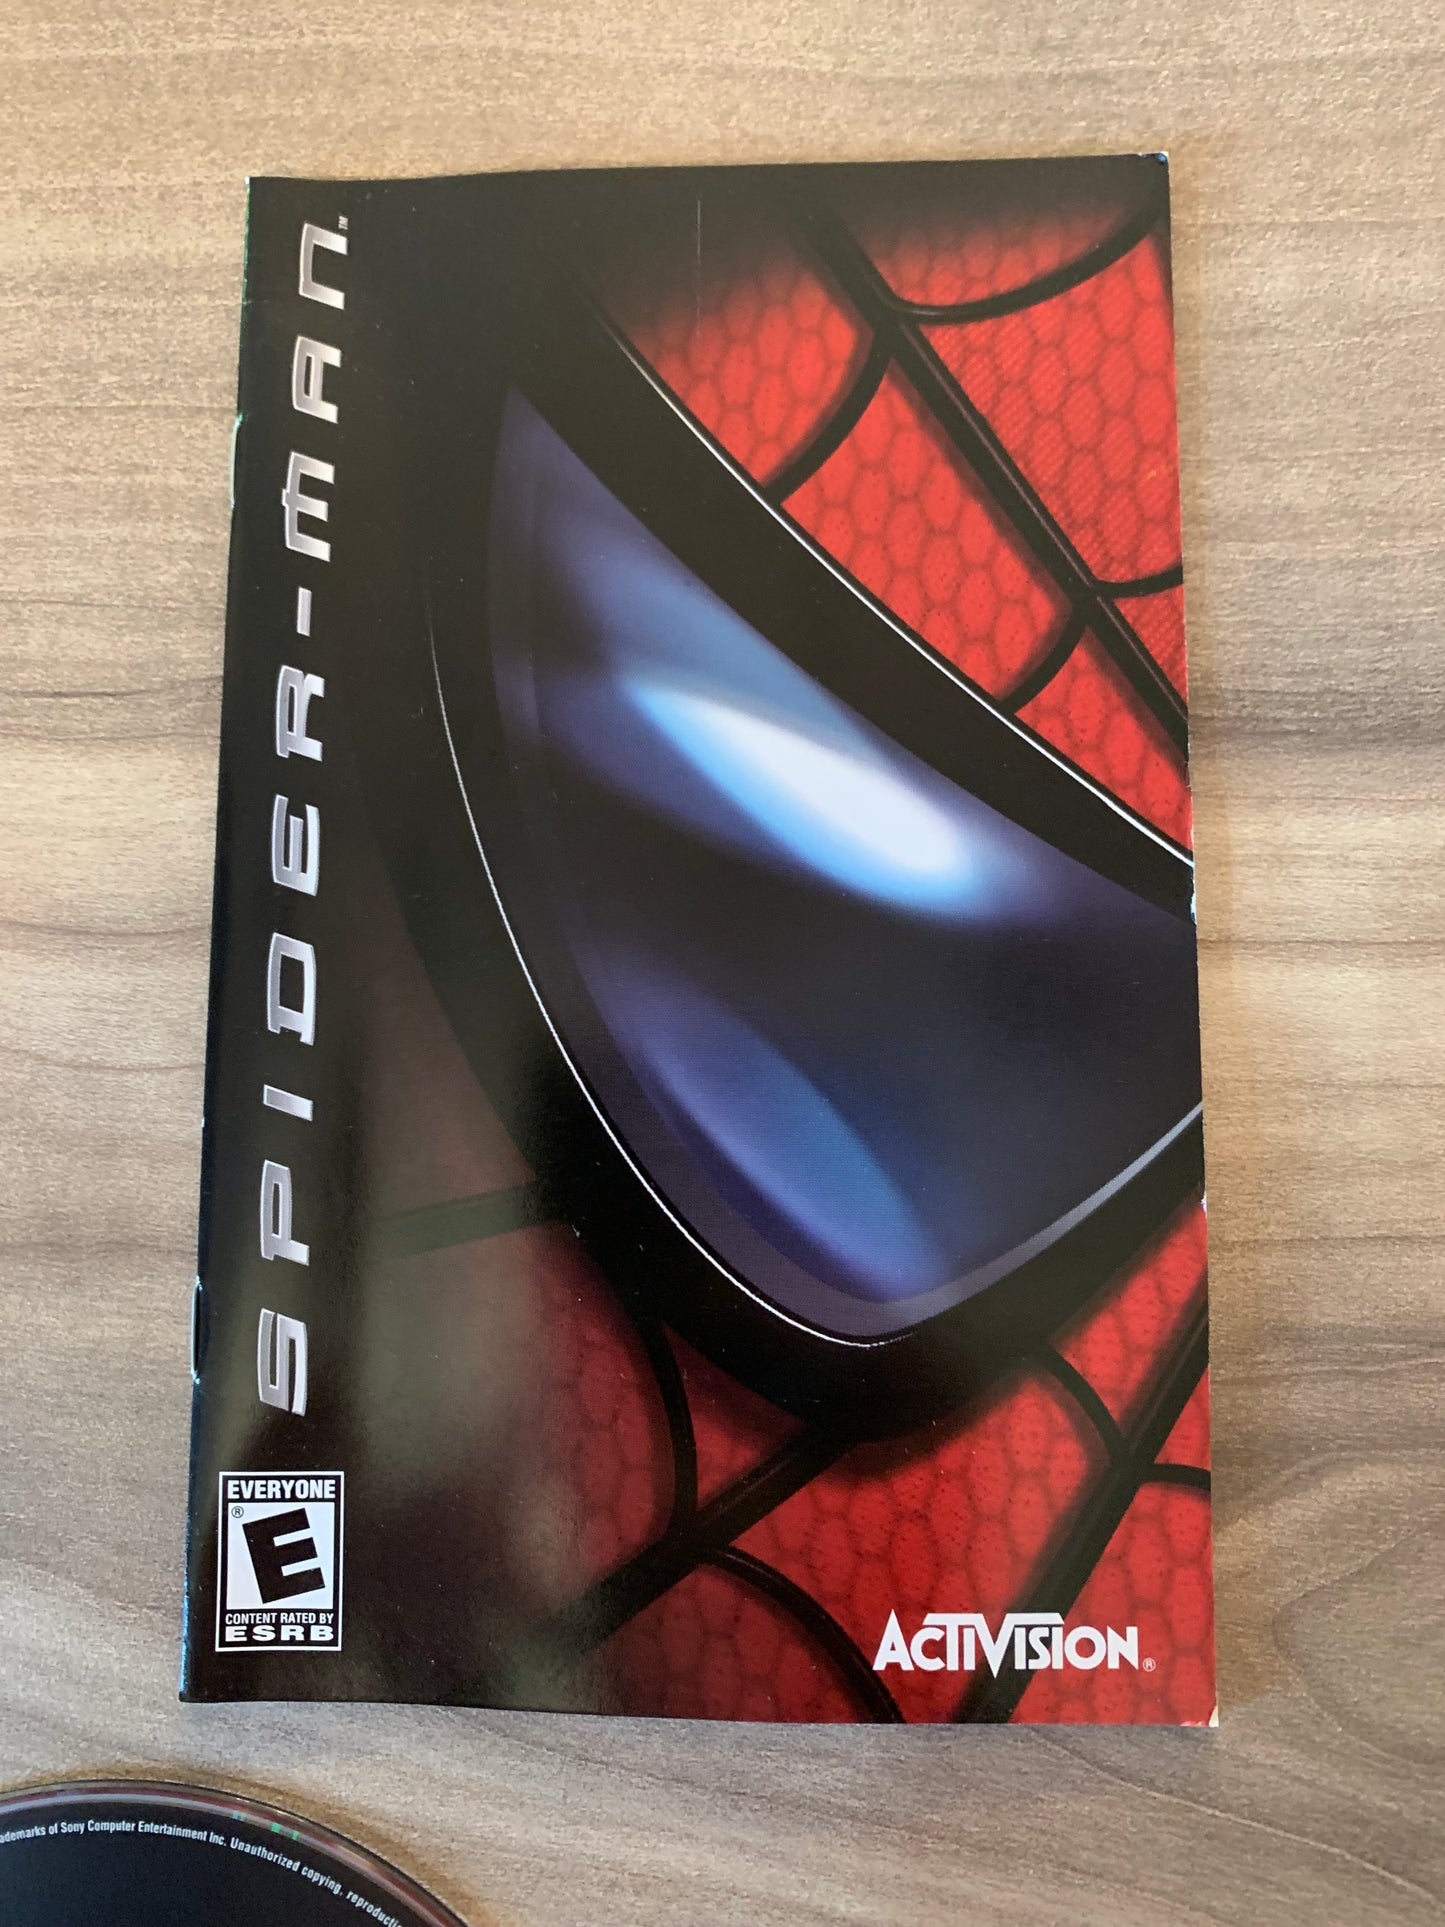 SONY PLAYSTATiON 2 [PS2] | SPiDER-MAN | GREATEST HiTS